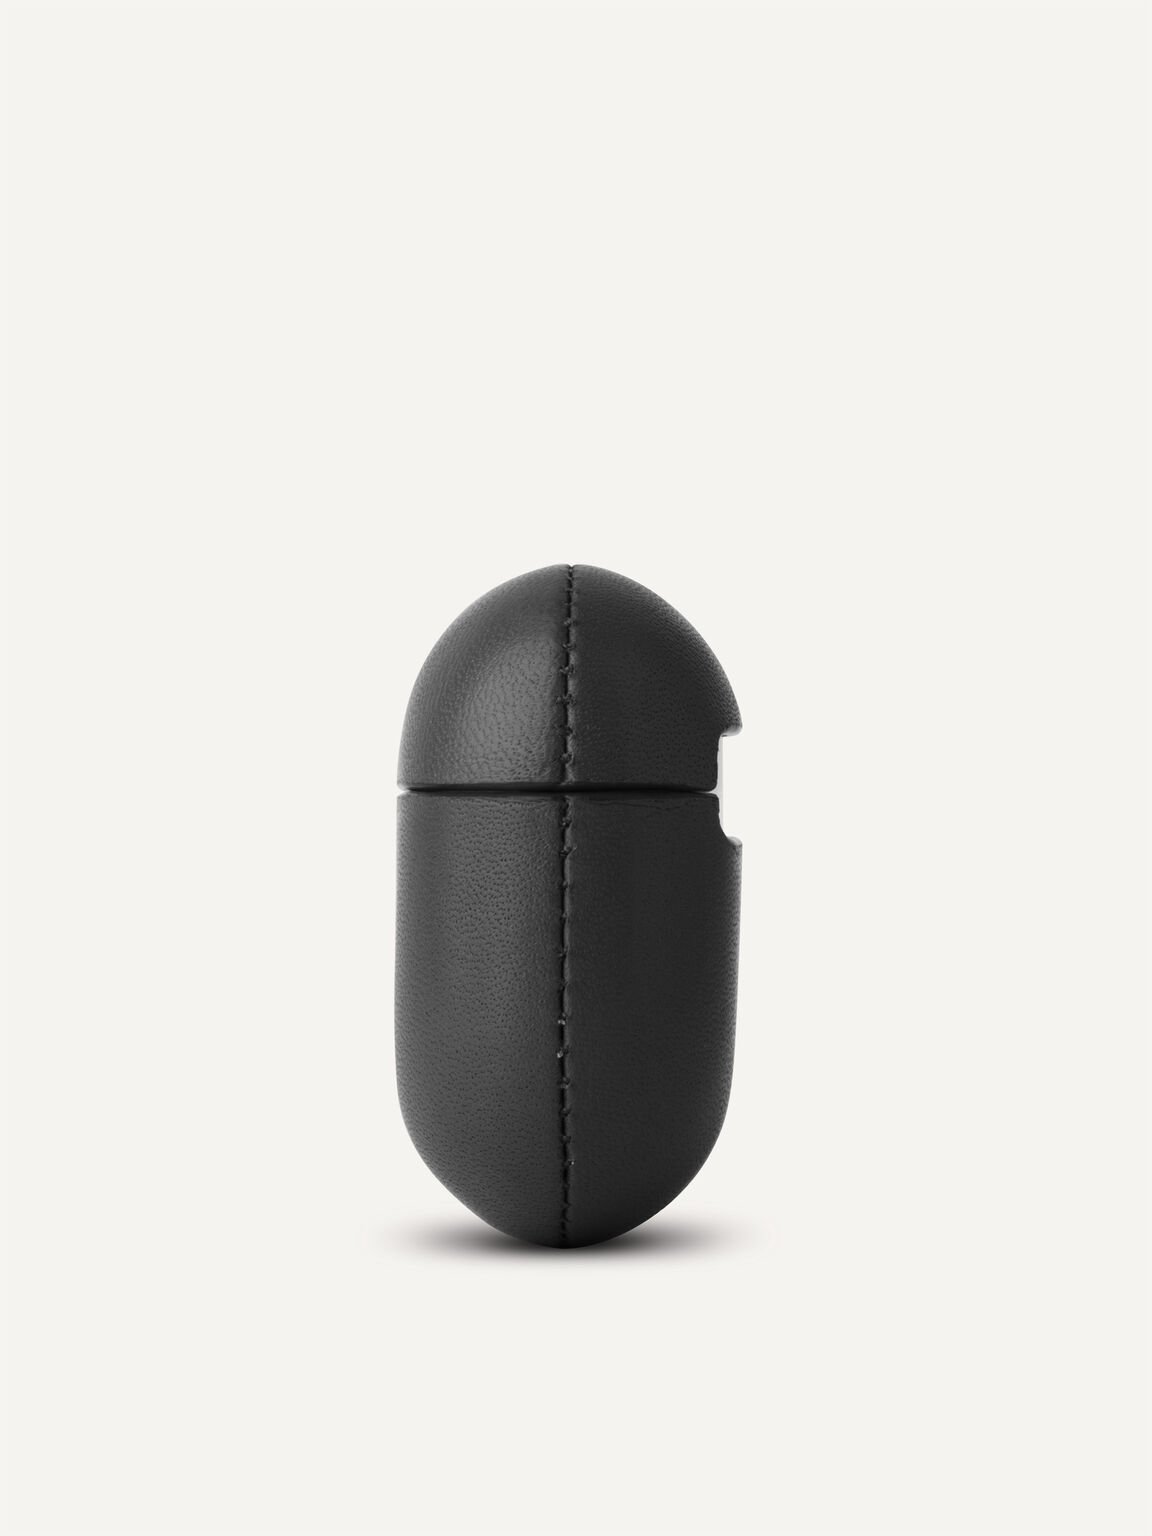 Leather Airpods Pro, Black